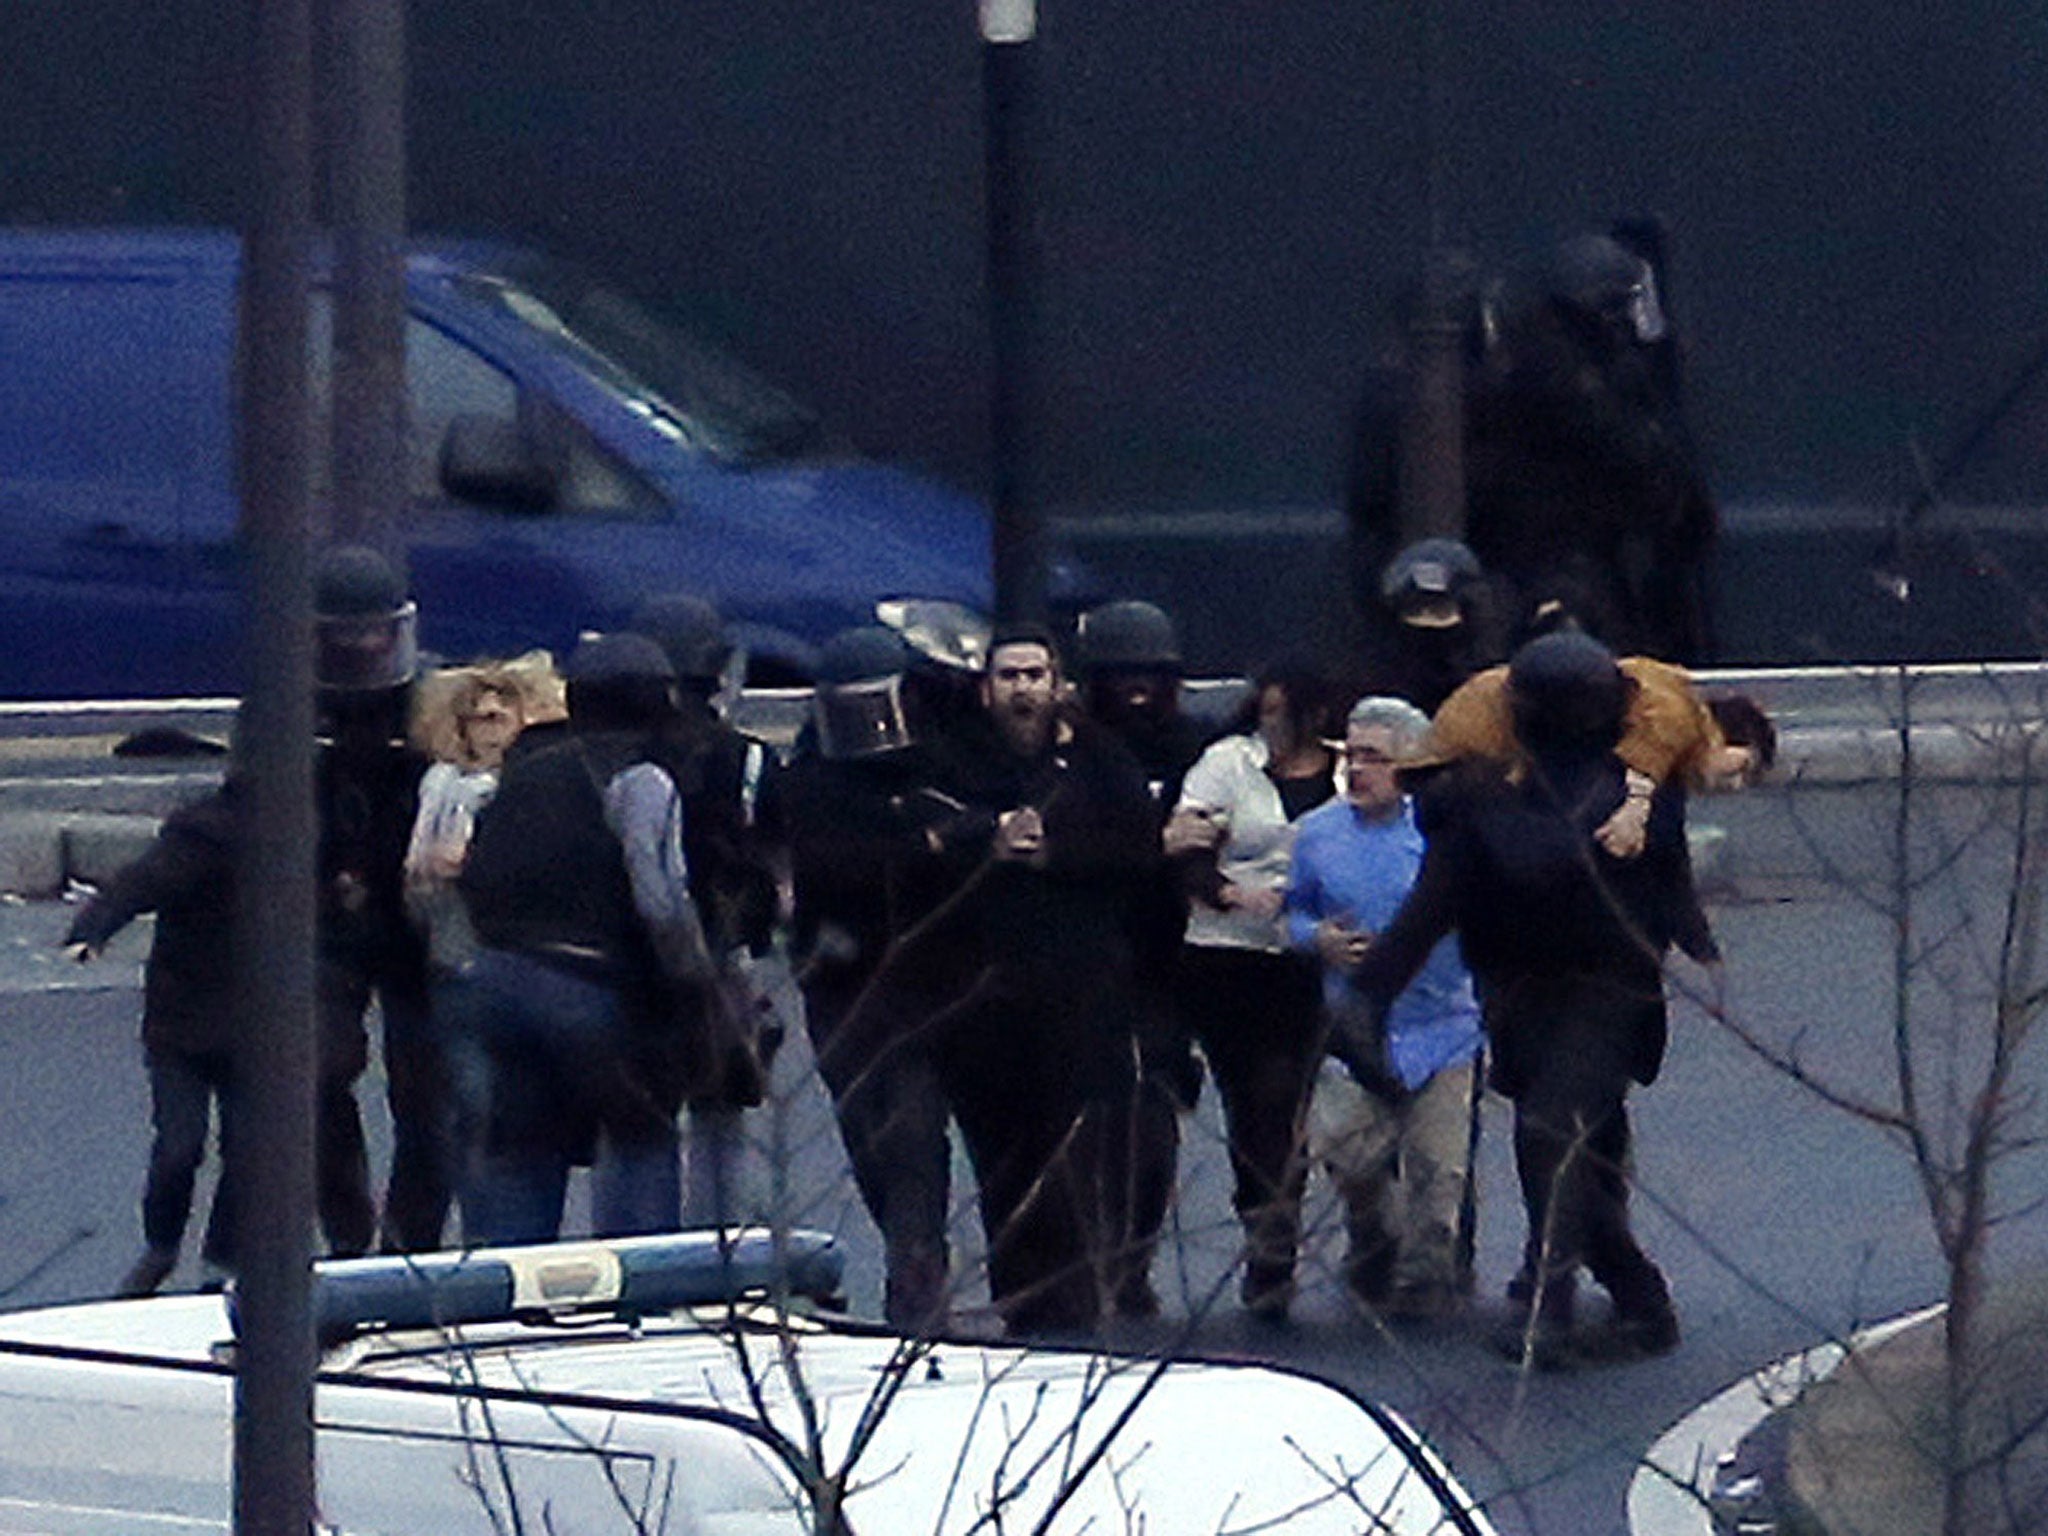 Members of the French police special forces evacuate the hostages after launching the assault at a kosher grocery store in Porte de Vincennes, eastern Paris